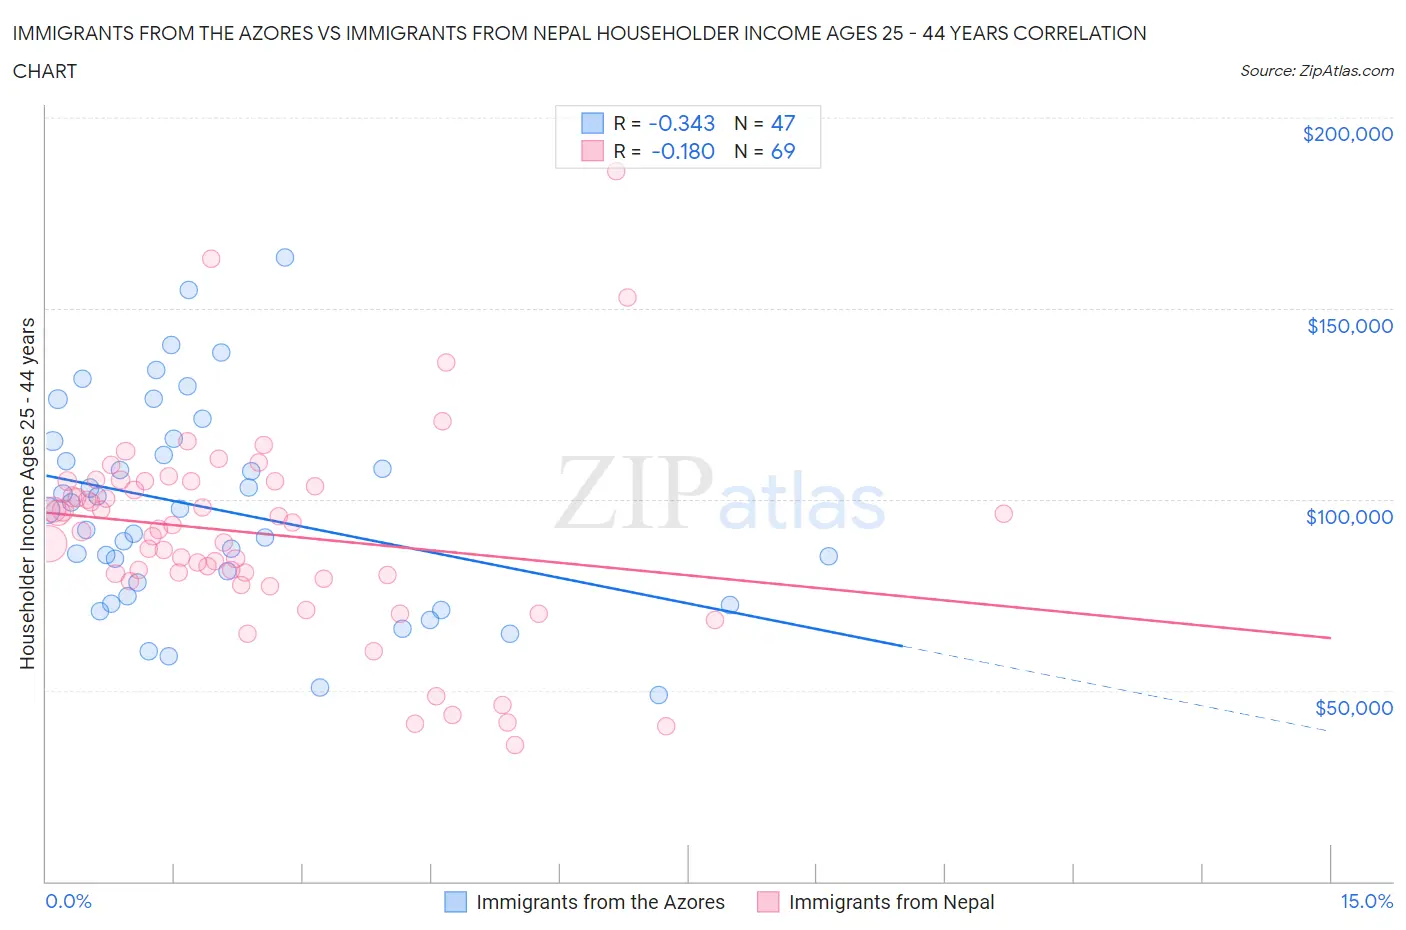 Immigrants from the Azores vs Immigrants from Nepal Householder Income Ages 25 - 44 years